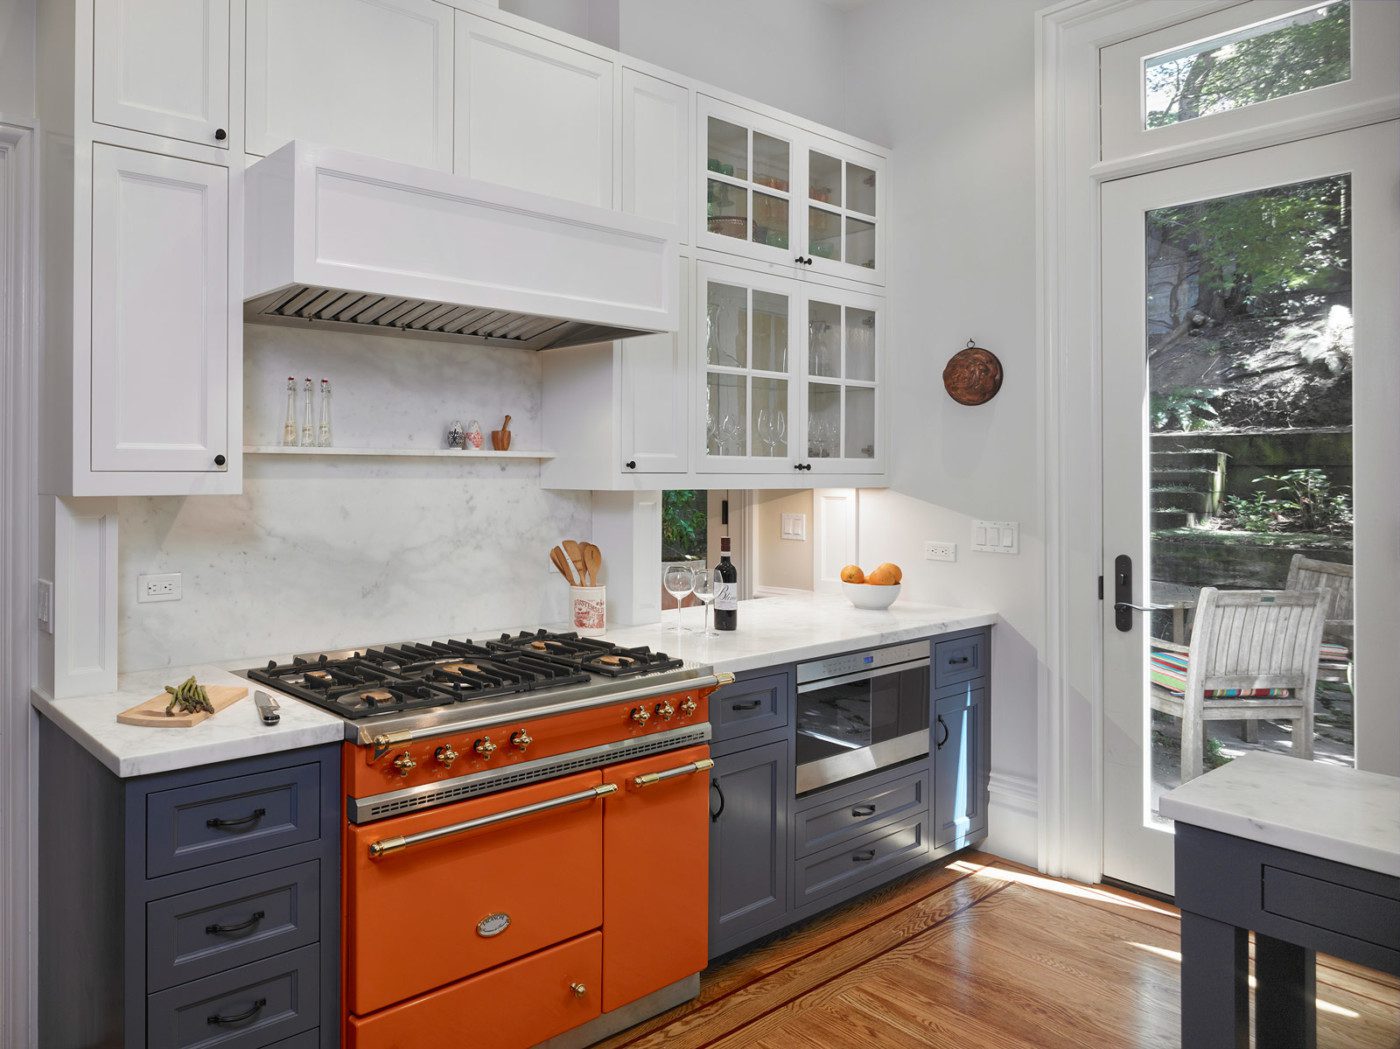 Orange Stove in Blue and White Kitchen in Renovated Victorian